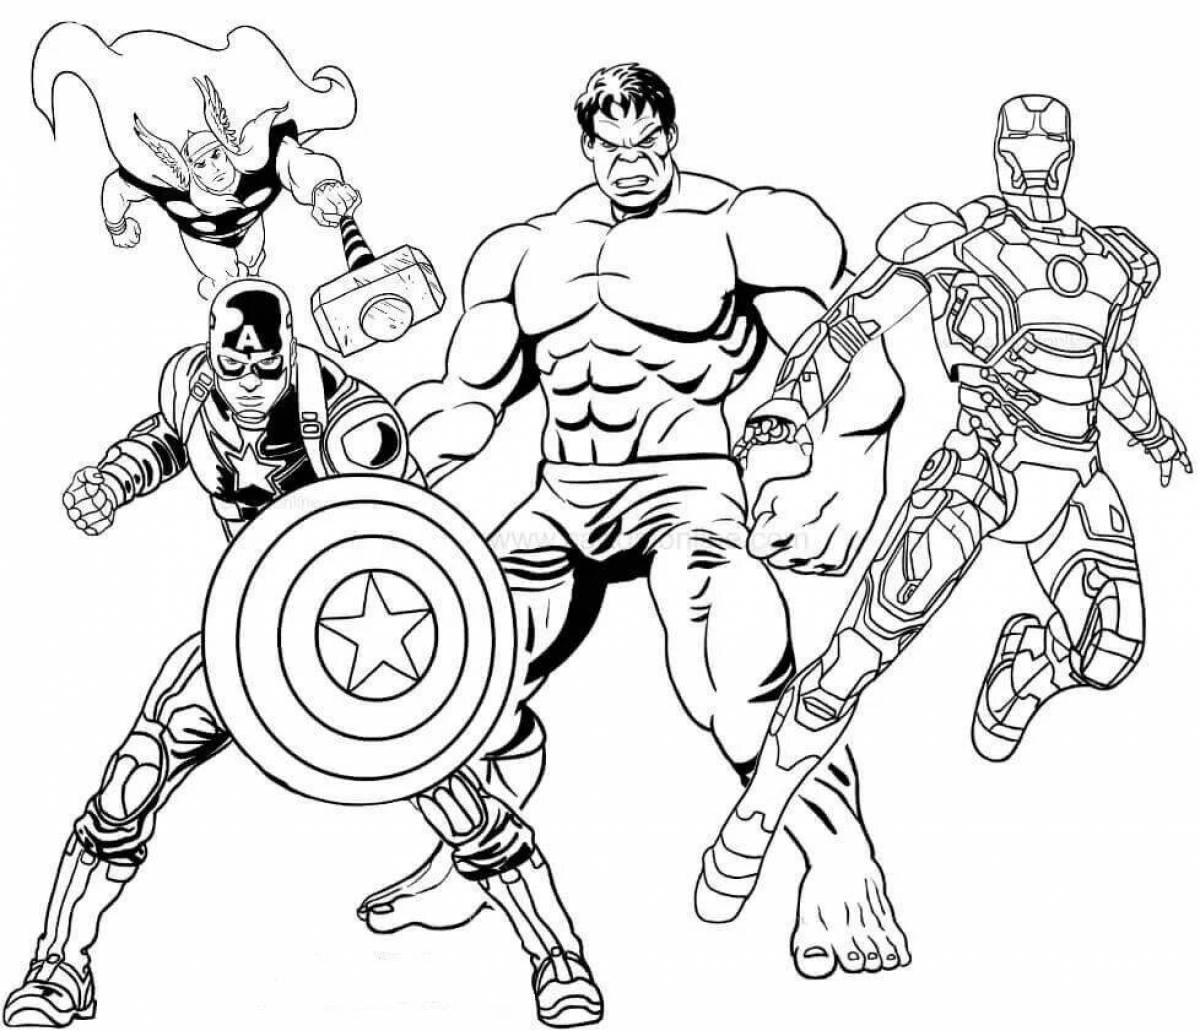 Marvel heroes colorful glitter coloring book for kids